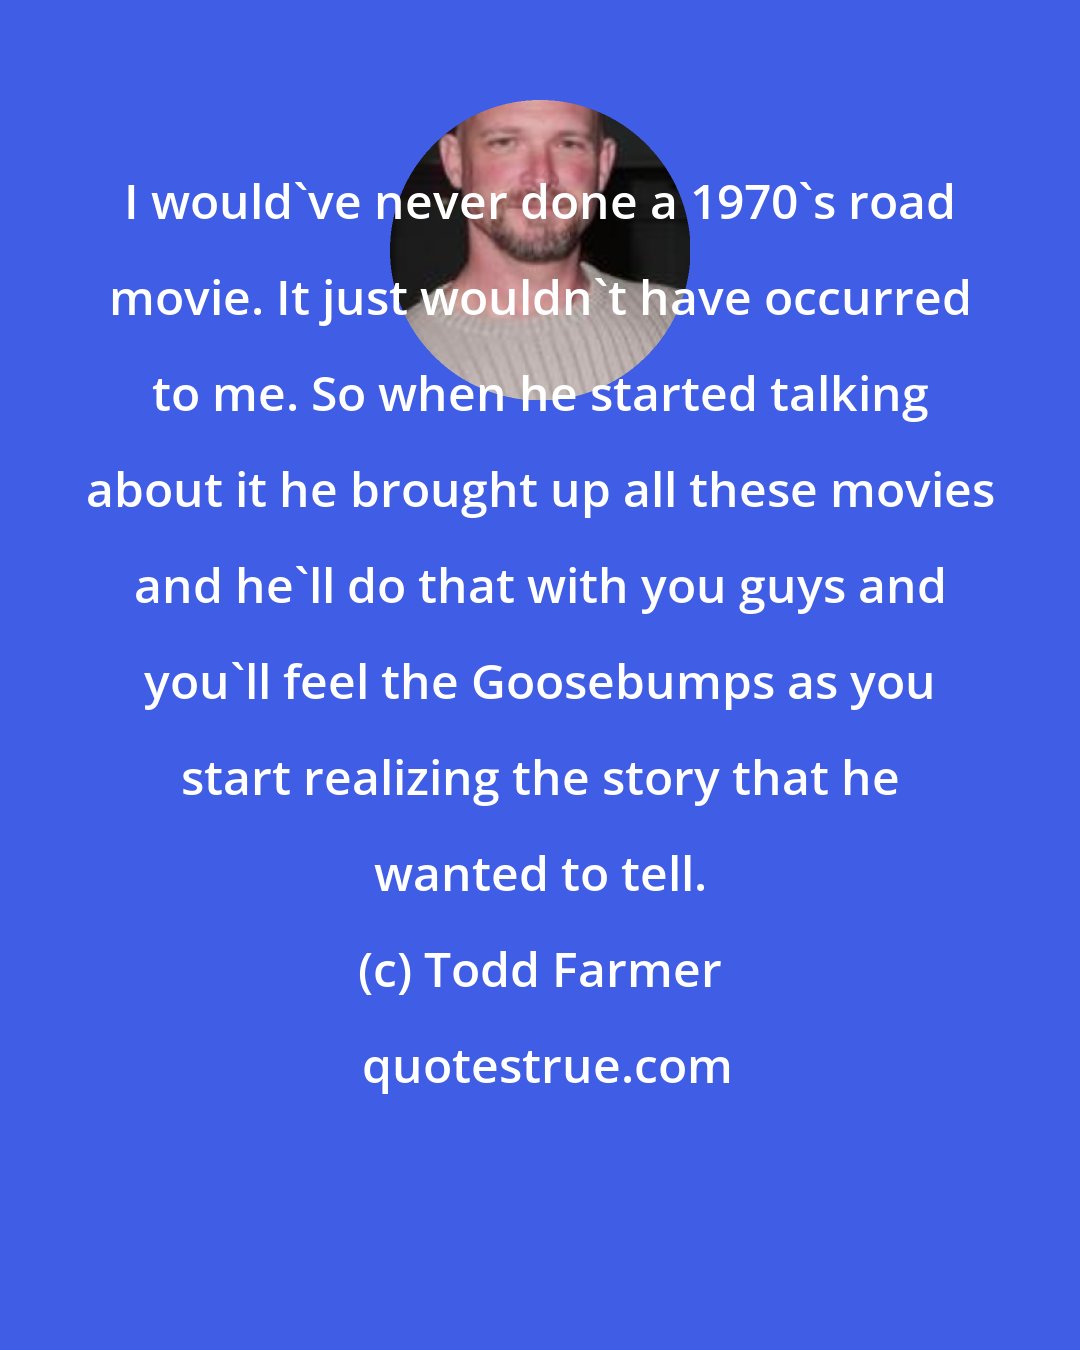 Todd Farmer: I would've never done a 1970's road movie. It just wouldn't have occurred to me. So when he started talking about it he brought up all these movies and he'll do that with you guys and you'll feel the Goosebumps as you start realizing the story that he wanted to tell.